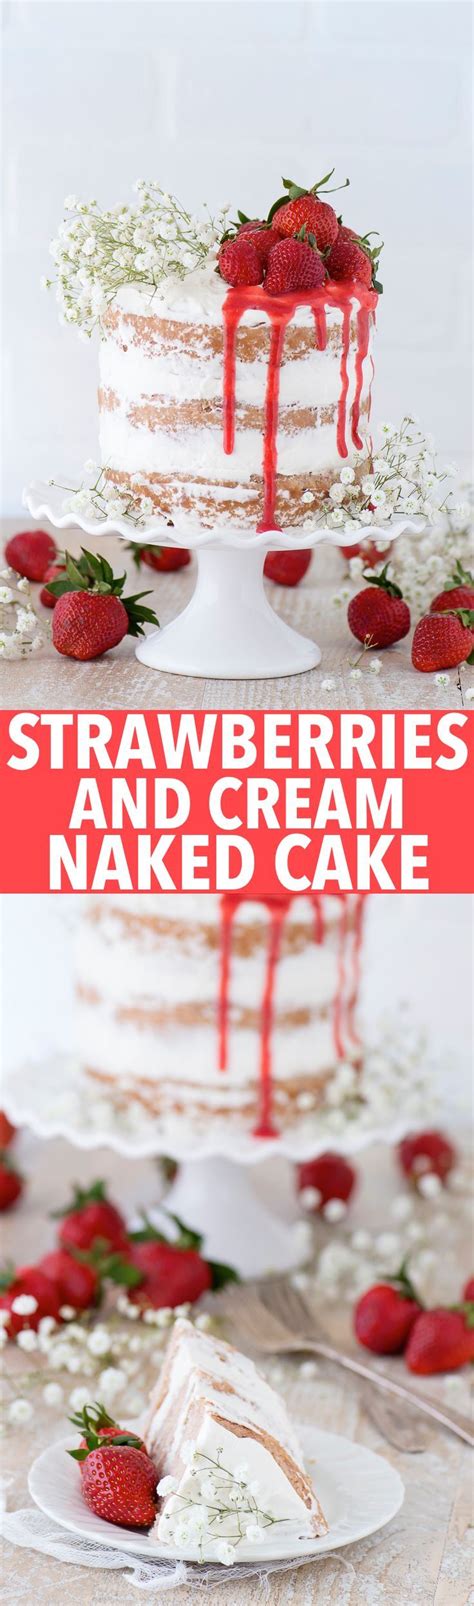 This Strawberry Naked Cake Is Made With Fresh Pureed Strawberries And Is Paired With Homemade